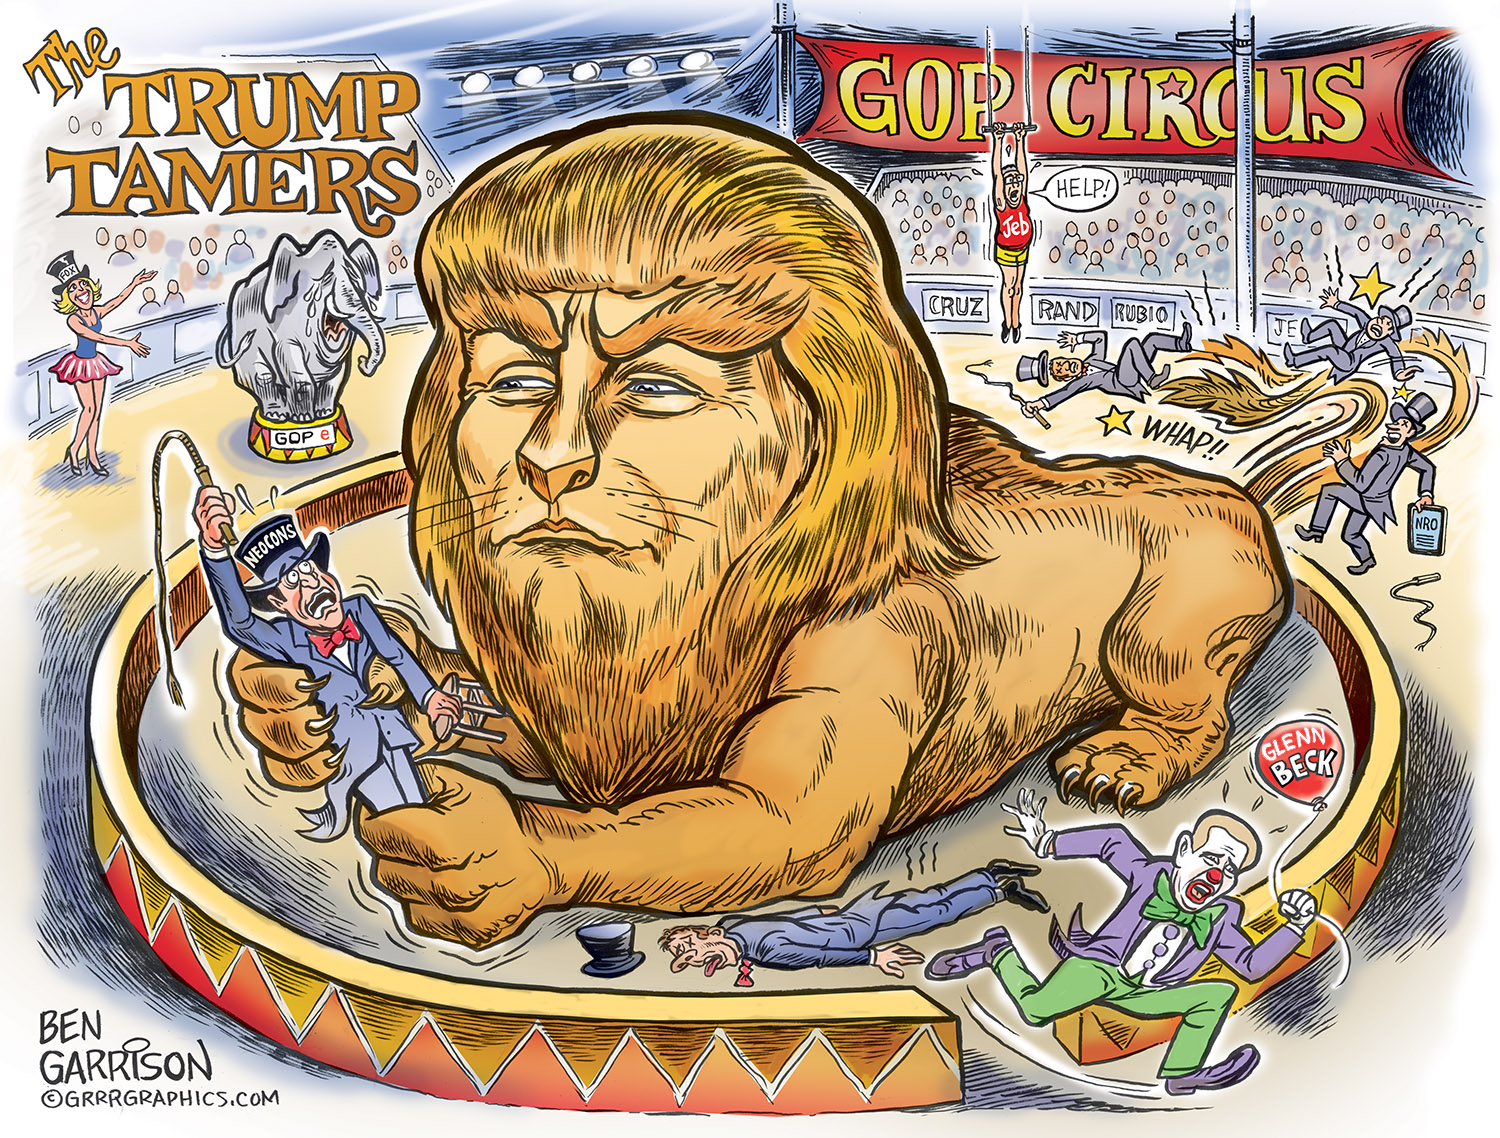 United States of the Solar System (3) - Page 11 Trump_tamers_ben_garrison